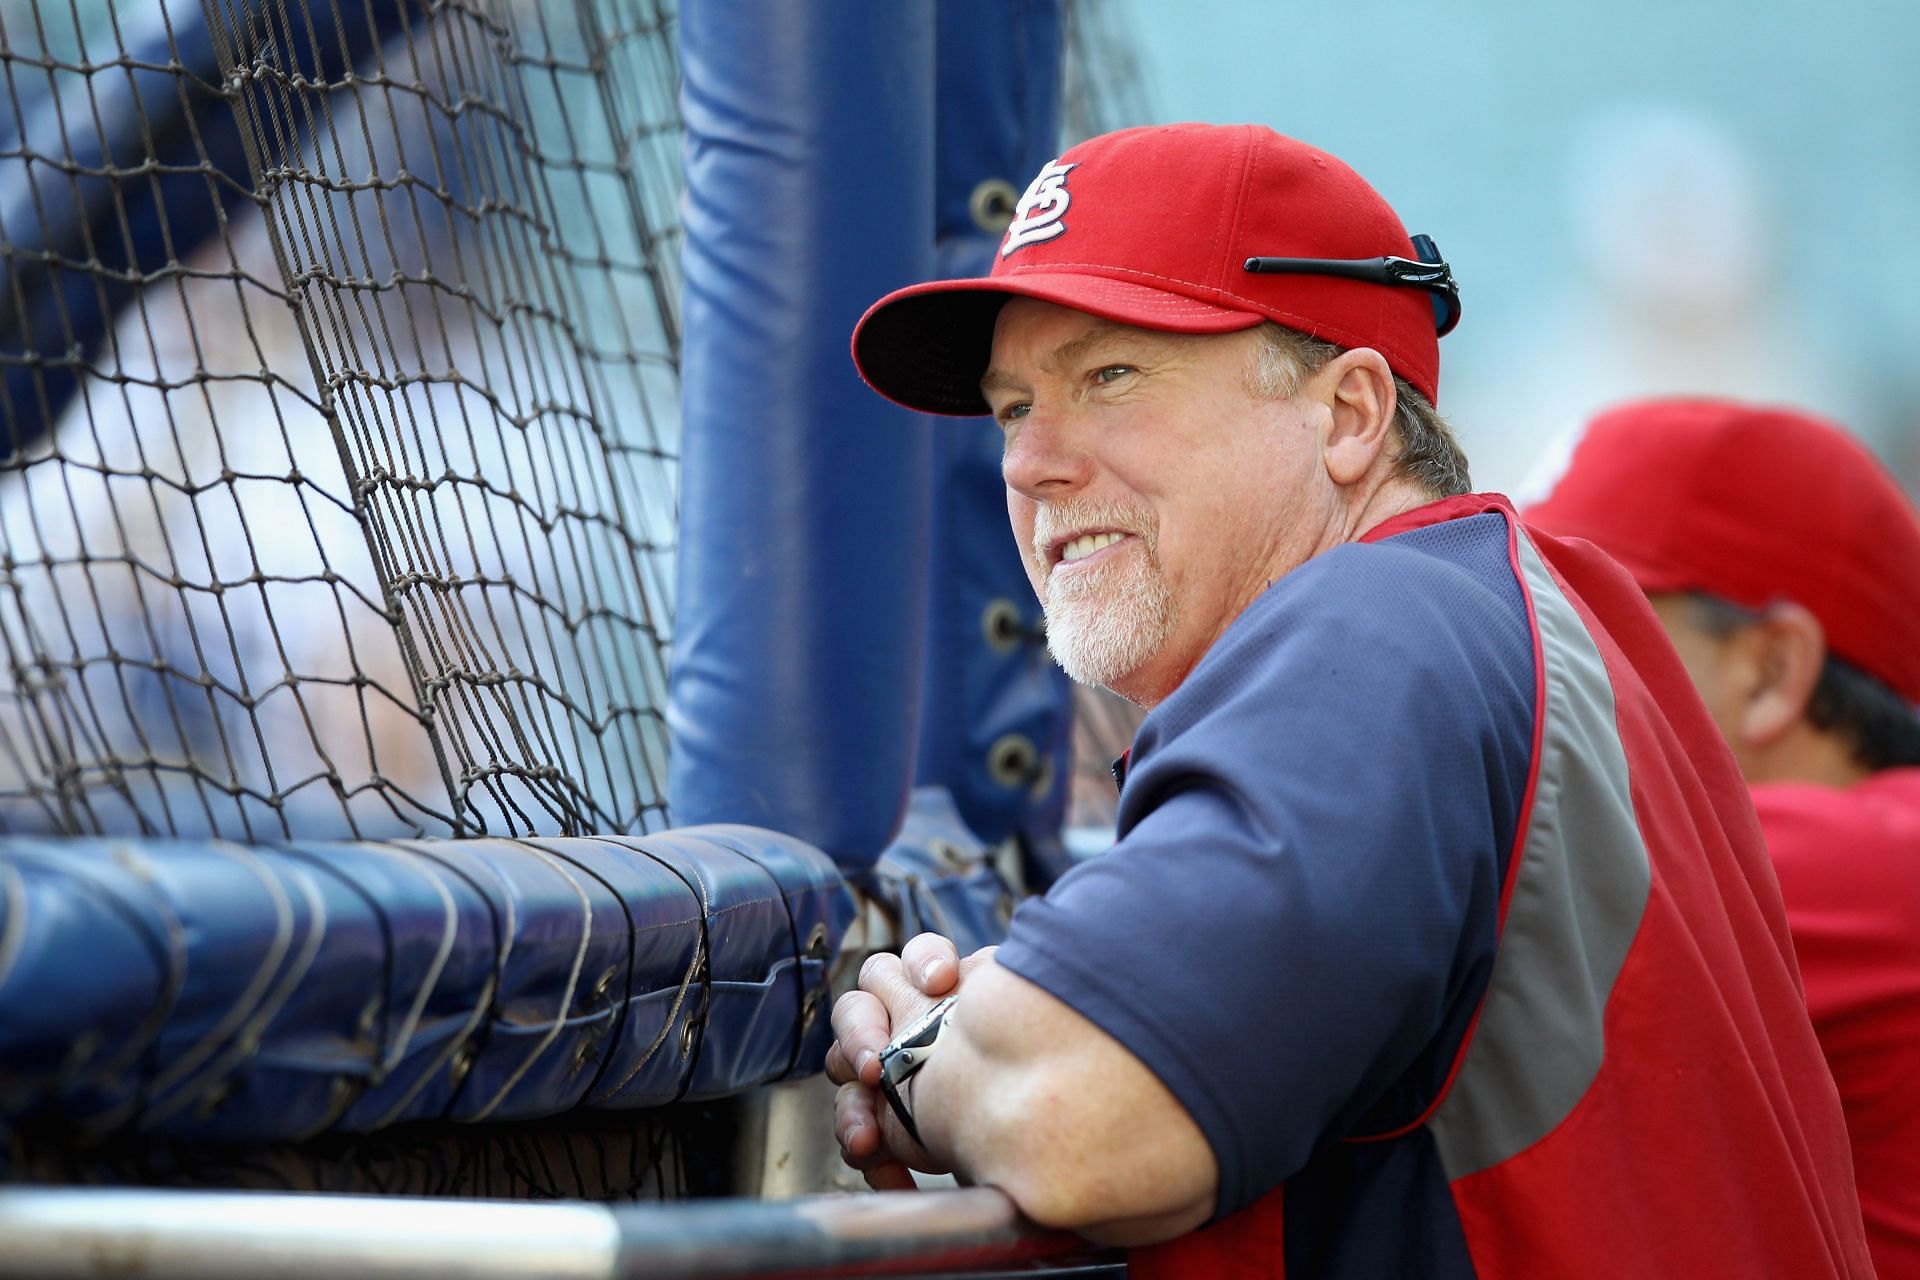 Hitting coach Mark McGwire of the St. Louis Cardinals looks on during batting practice at Miller Park